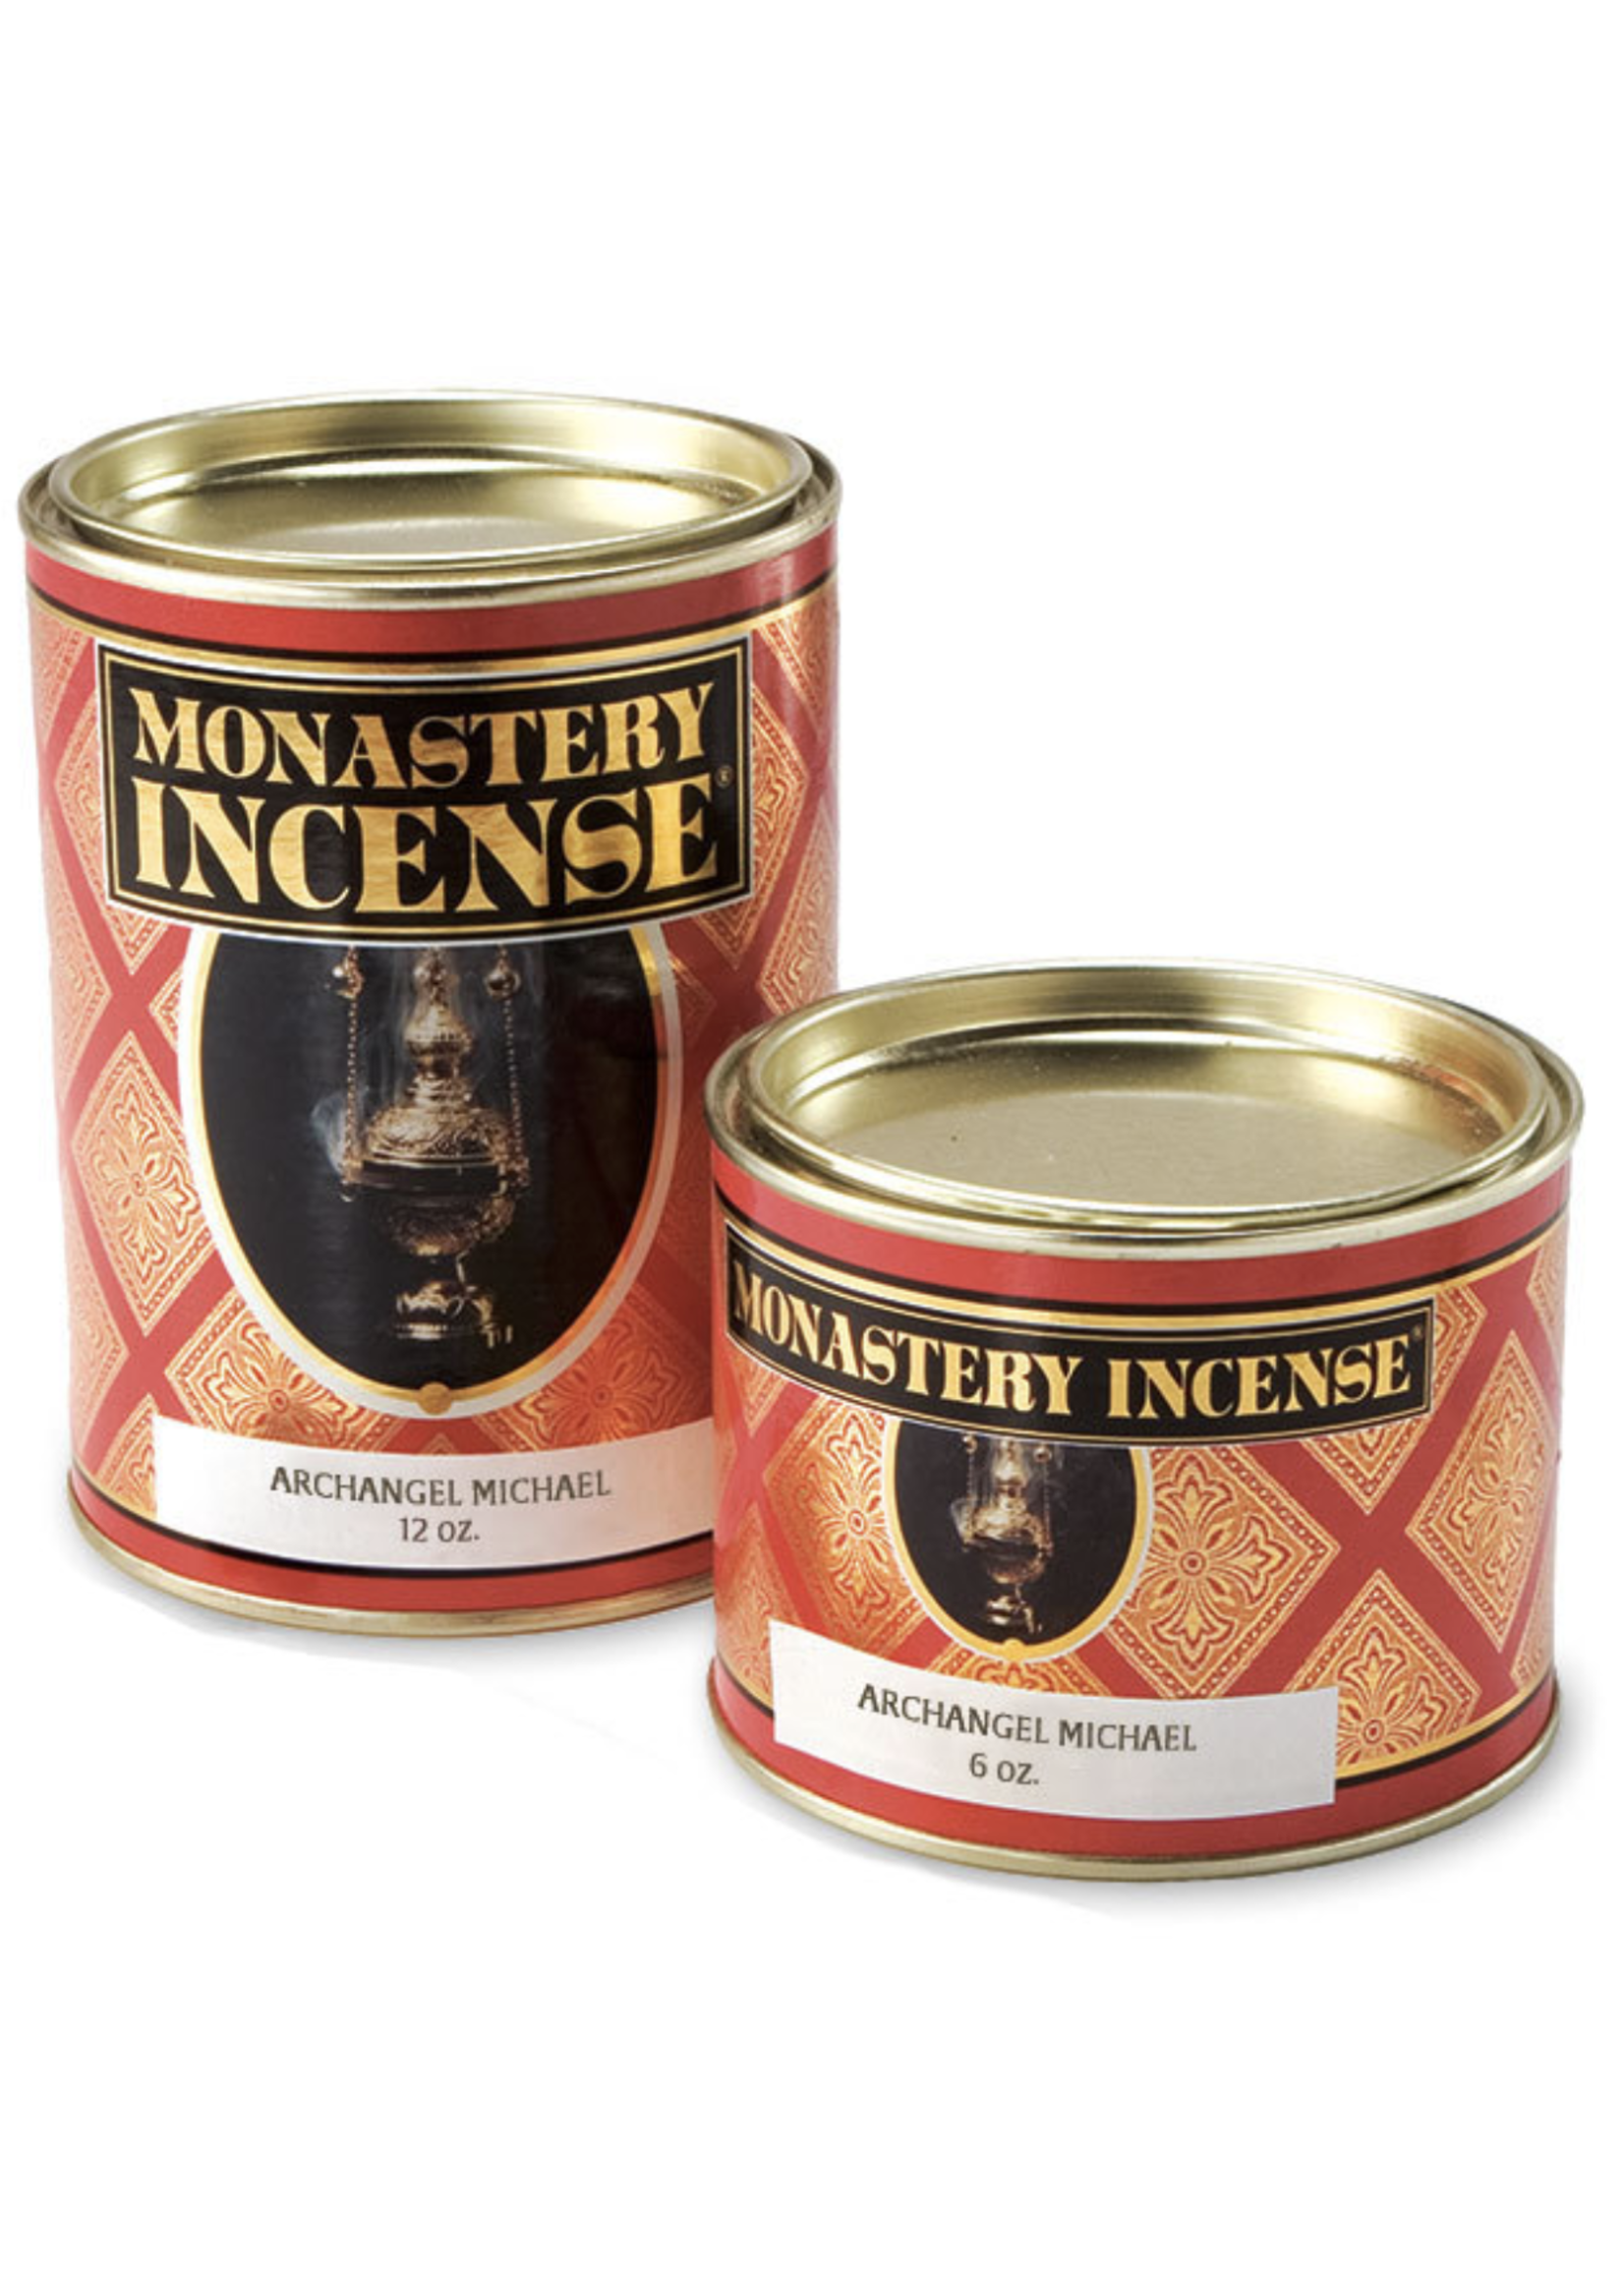 Monastery Incense - Assorted Scents & Sizes